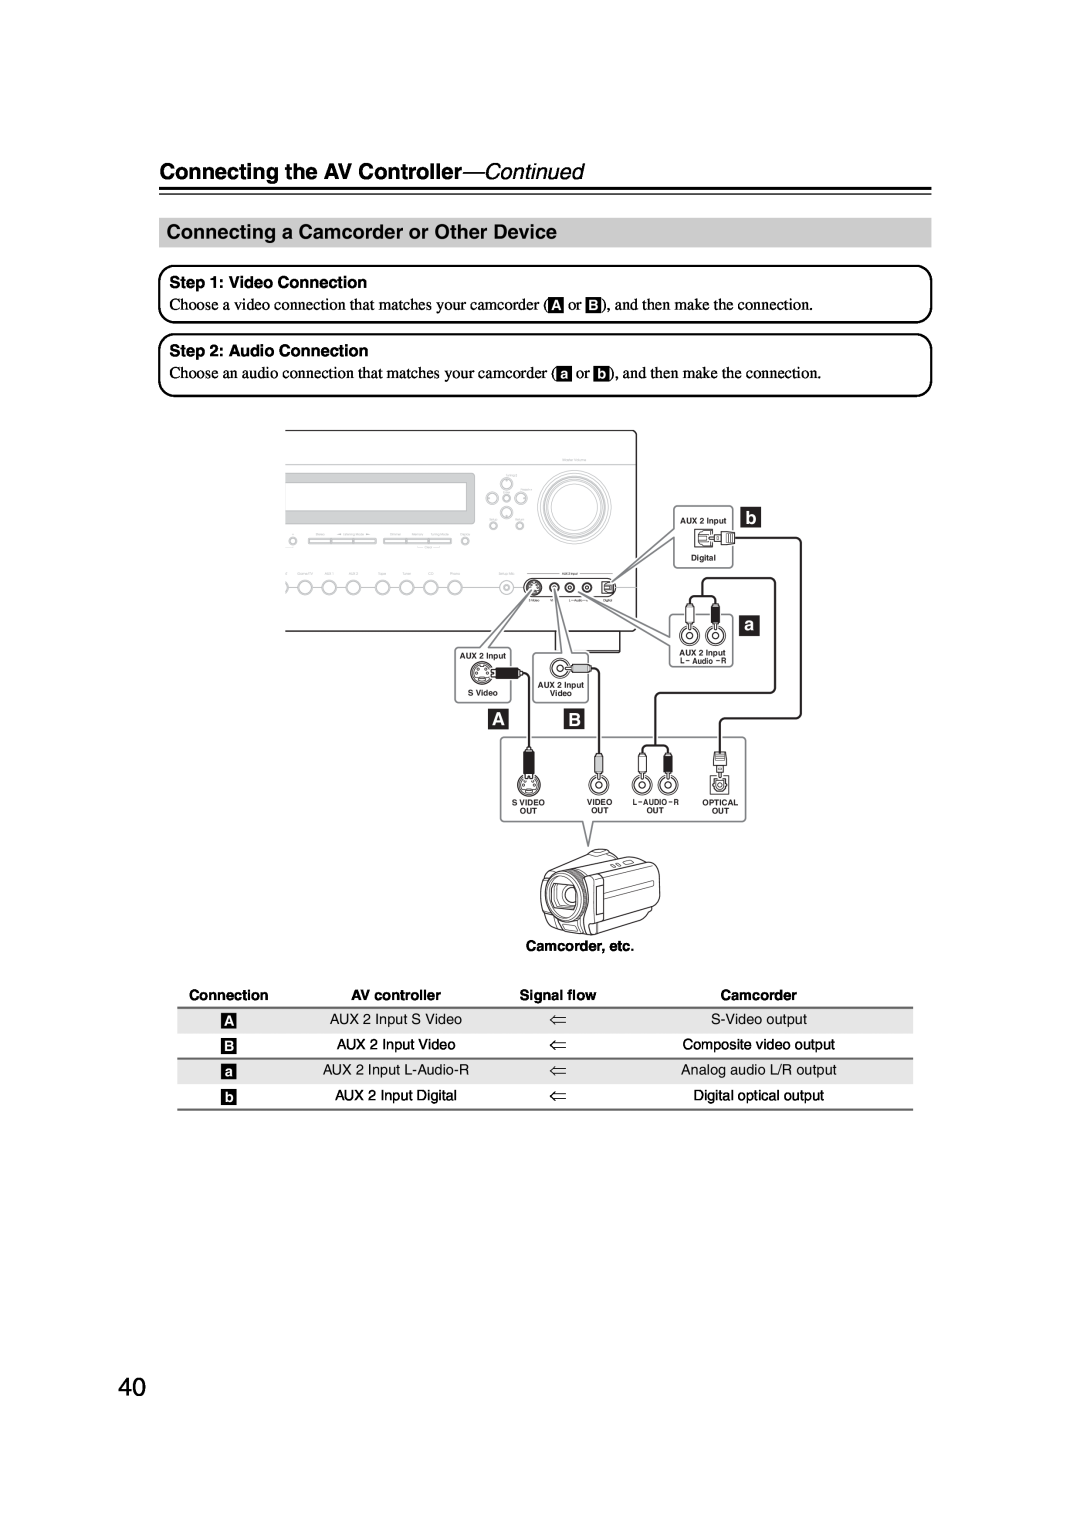 Integra DHC-9.9 instruction manual Connecting a Camcorder or Other Device, Connecting the AV Controller—Continued 